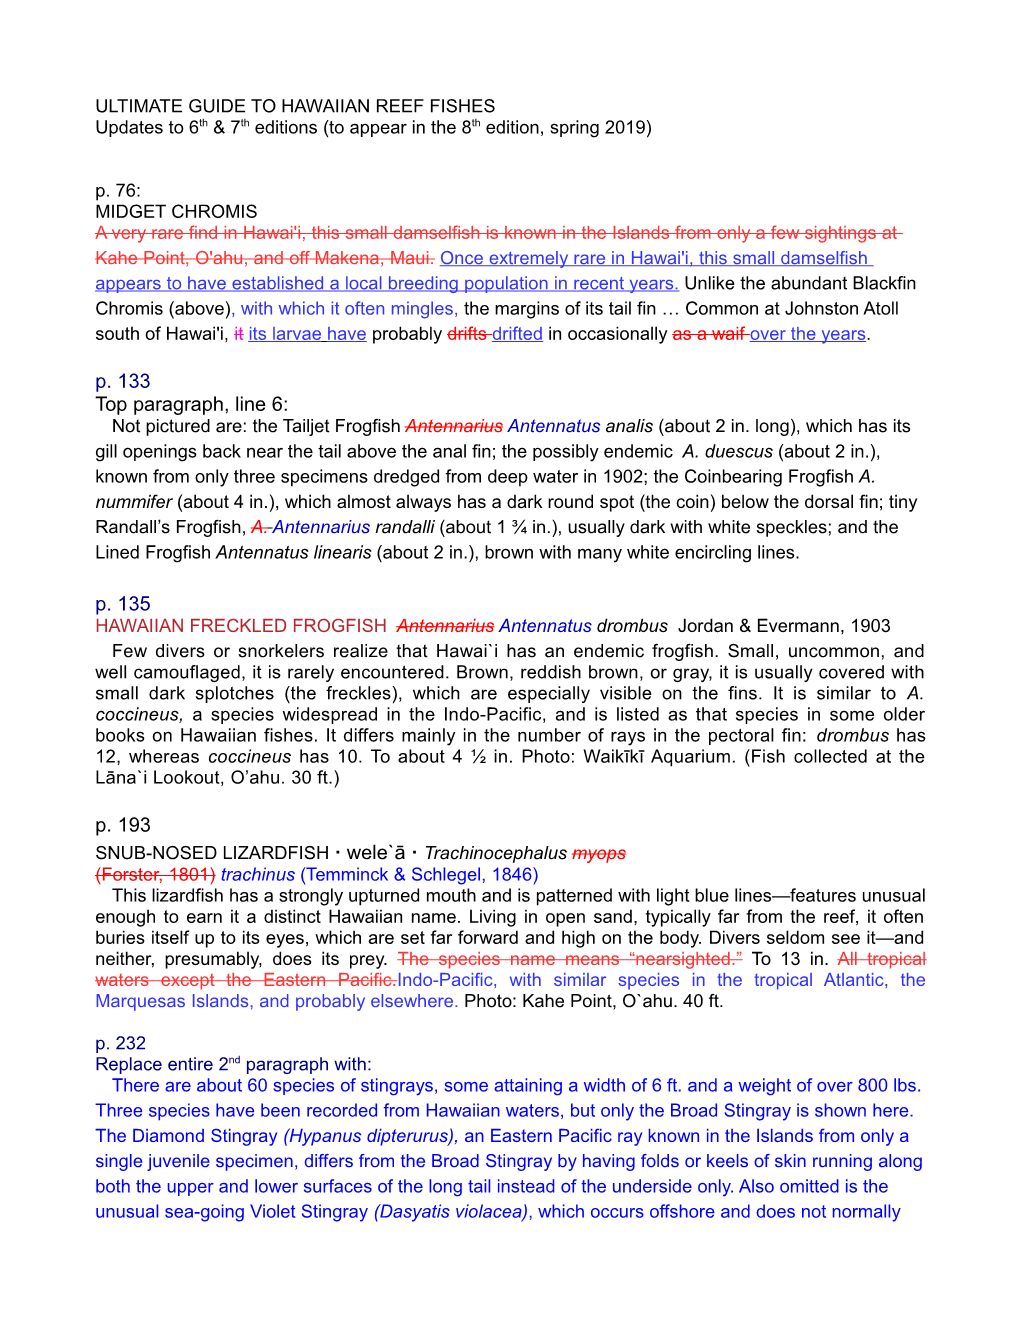 1 Page PDF Document Listing Updates and Corrections to the 6Th / 7Th